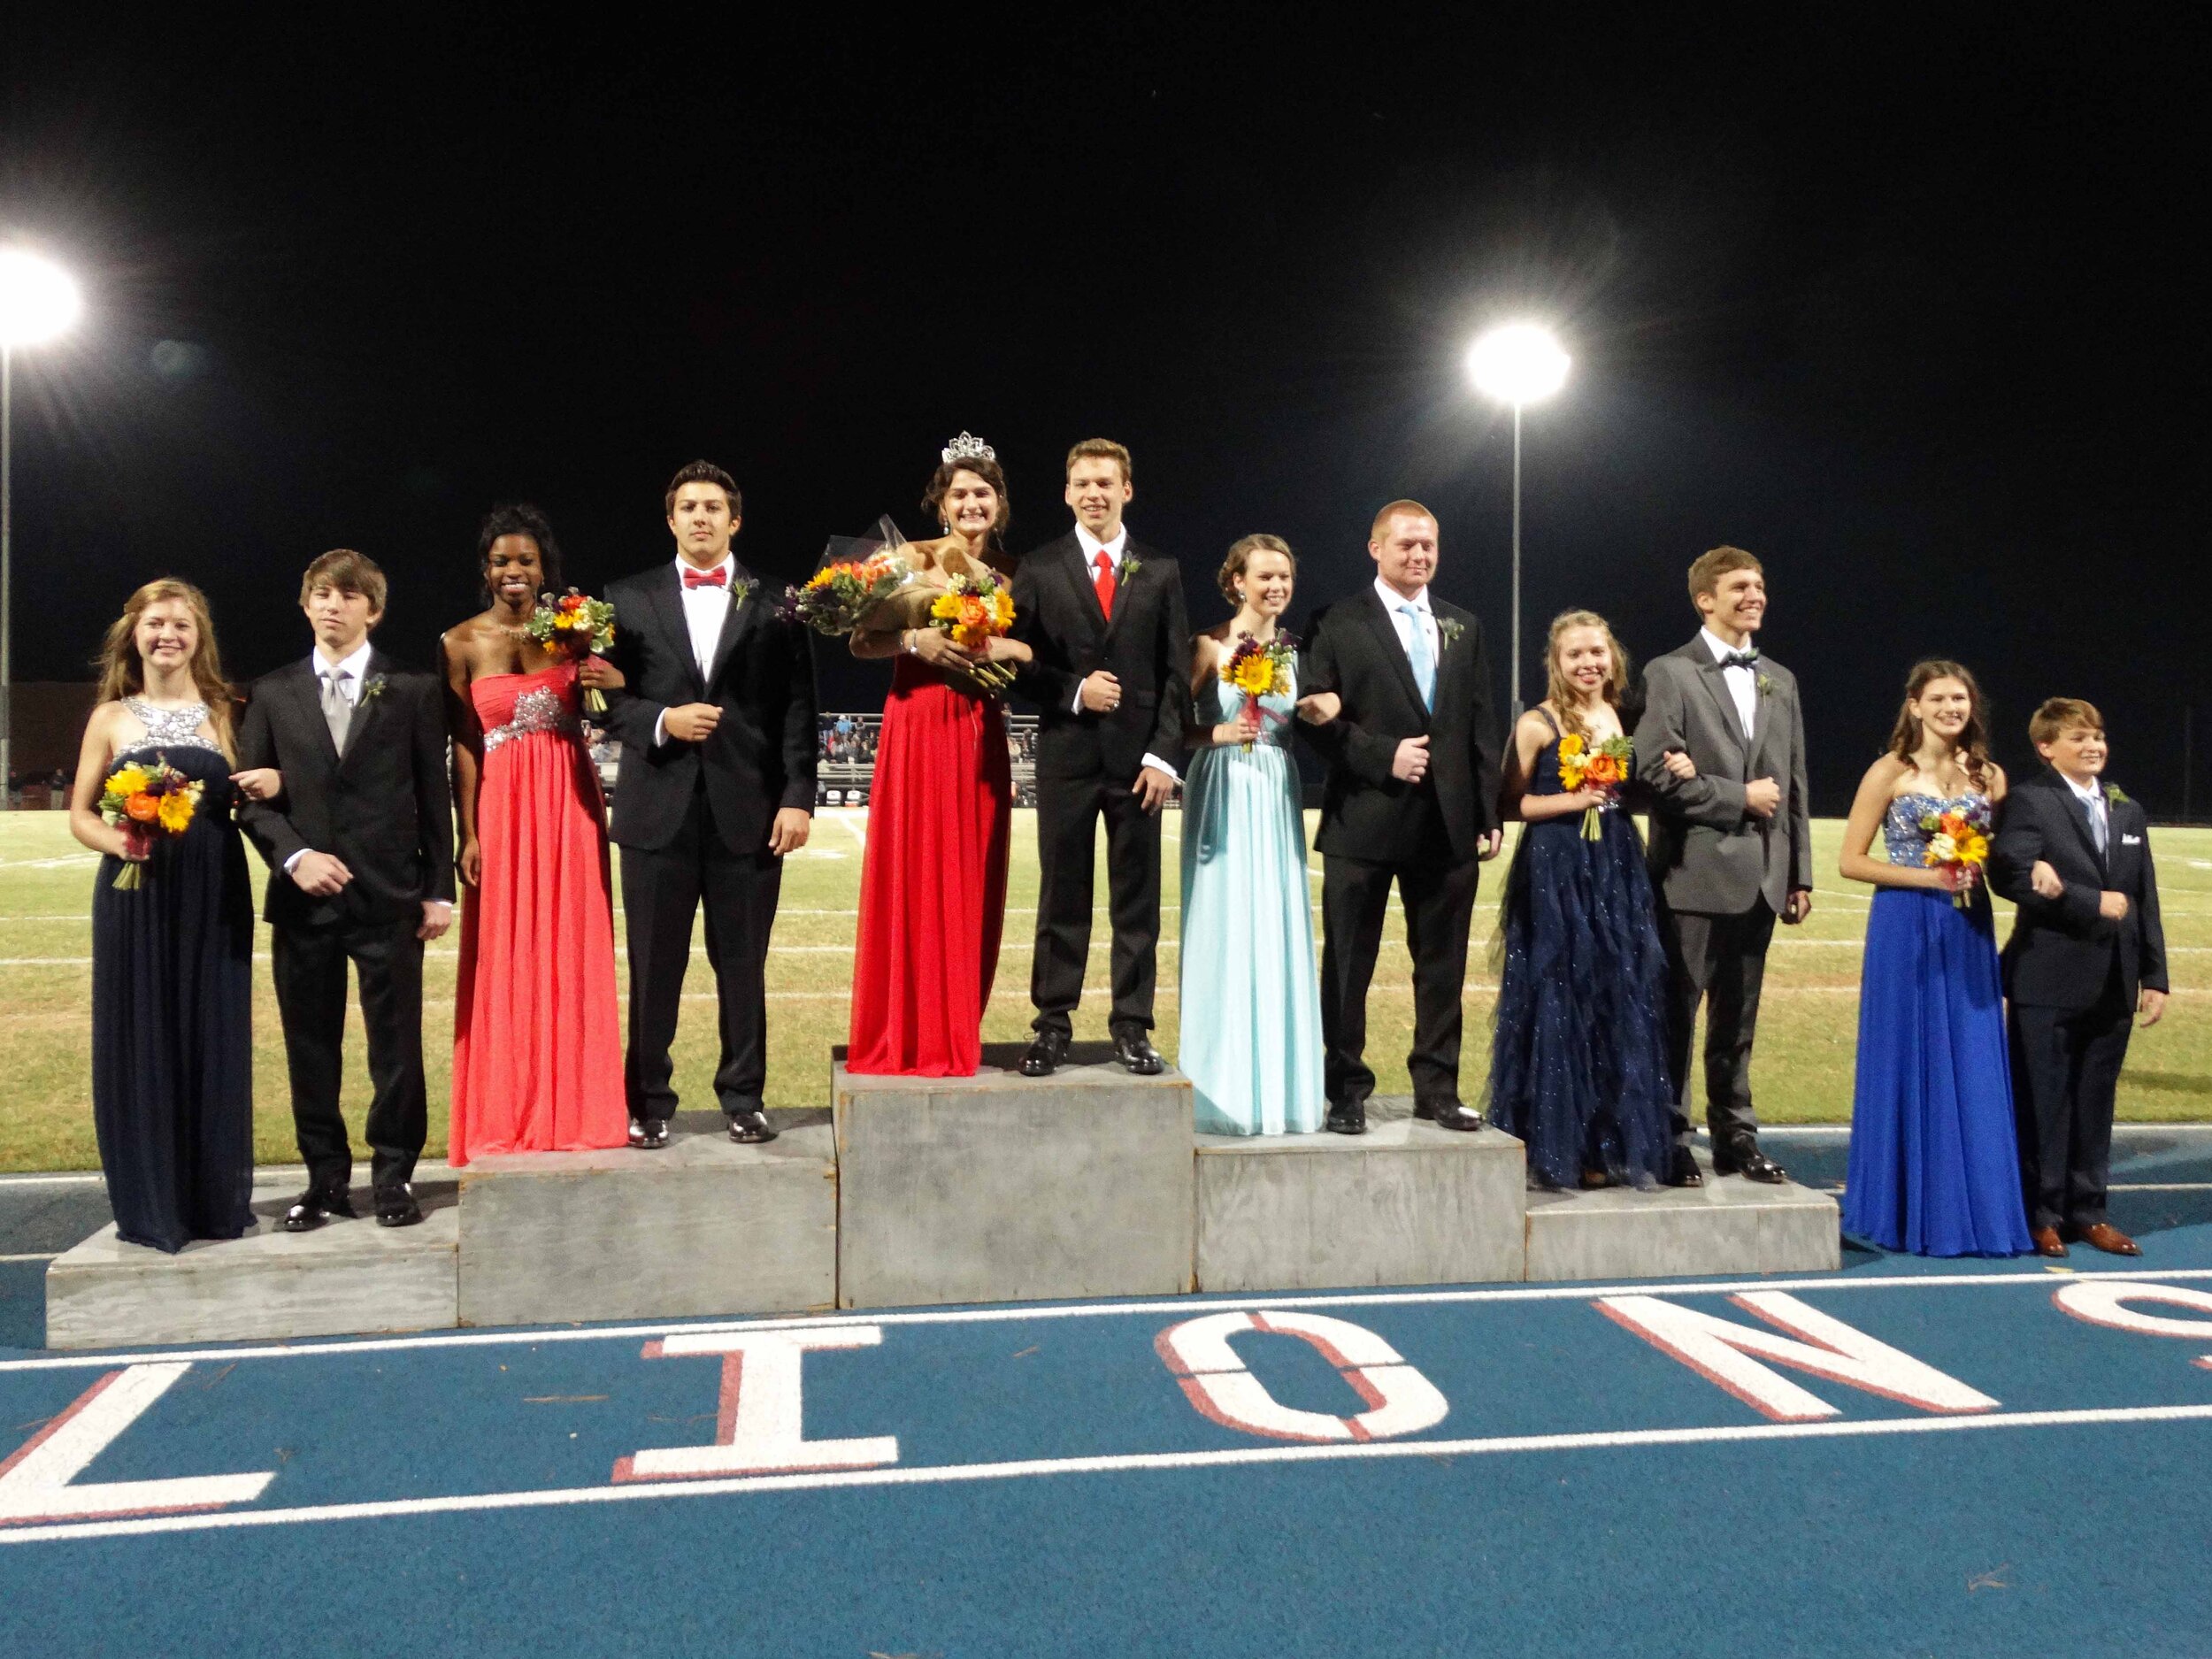 Pictured L-R: Macey Darnell with David Jackson; Kristen Gaines with Jonathan Mensi; Sara Jones (Queen) with Skylar Oliver; Kelsi Elkins with Nolan Stevens; Abigail Curtis with Caleb Knight; Lauren Deaton with Cole Williamson.